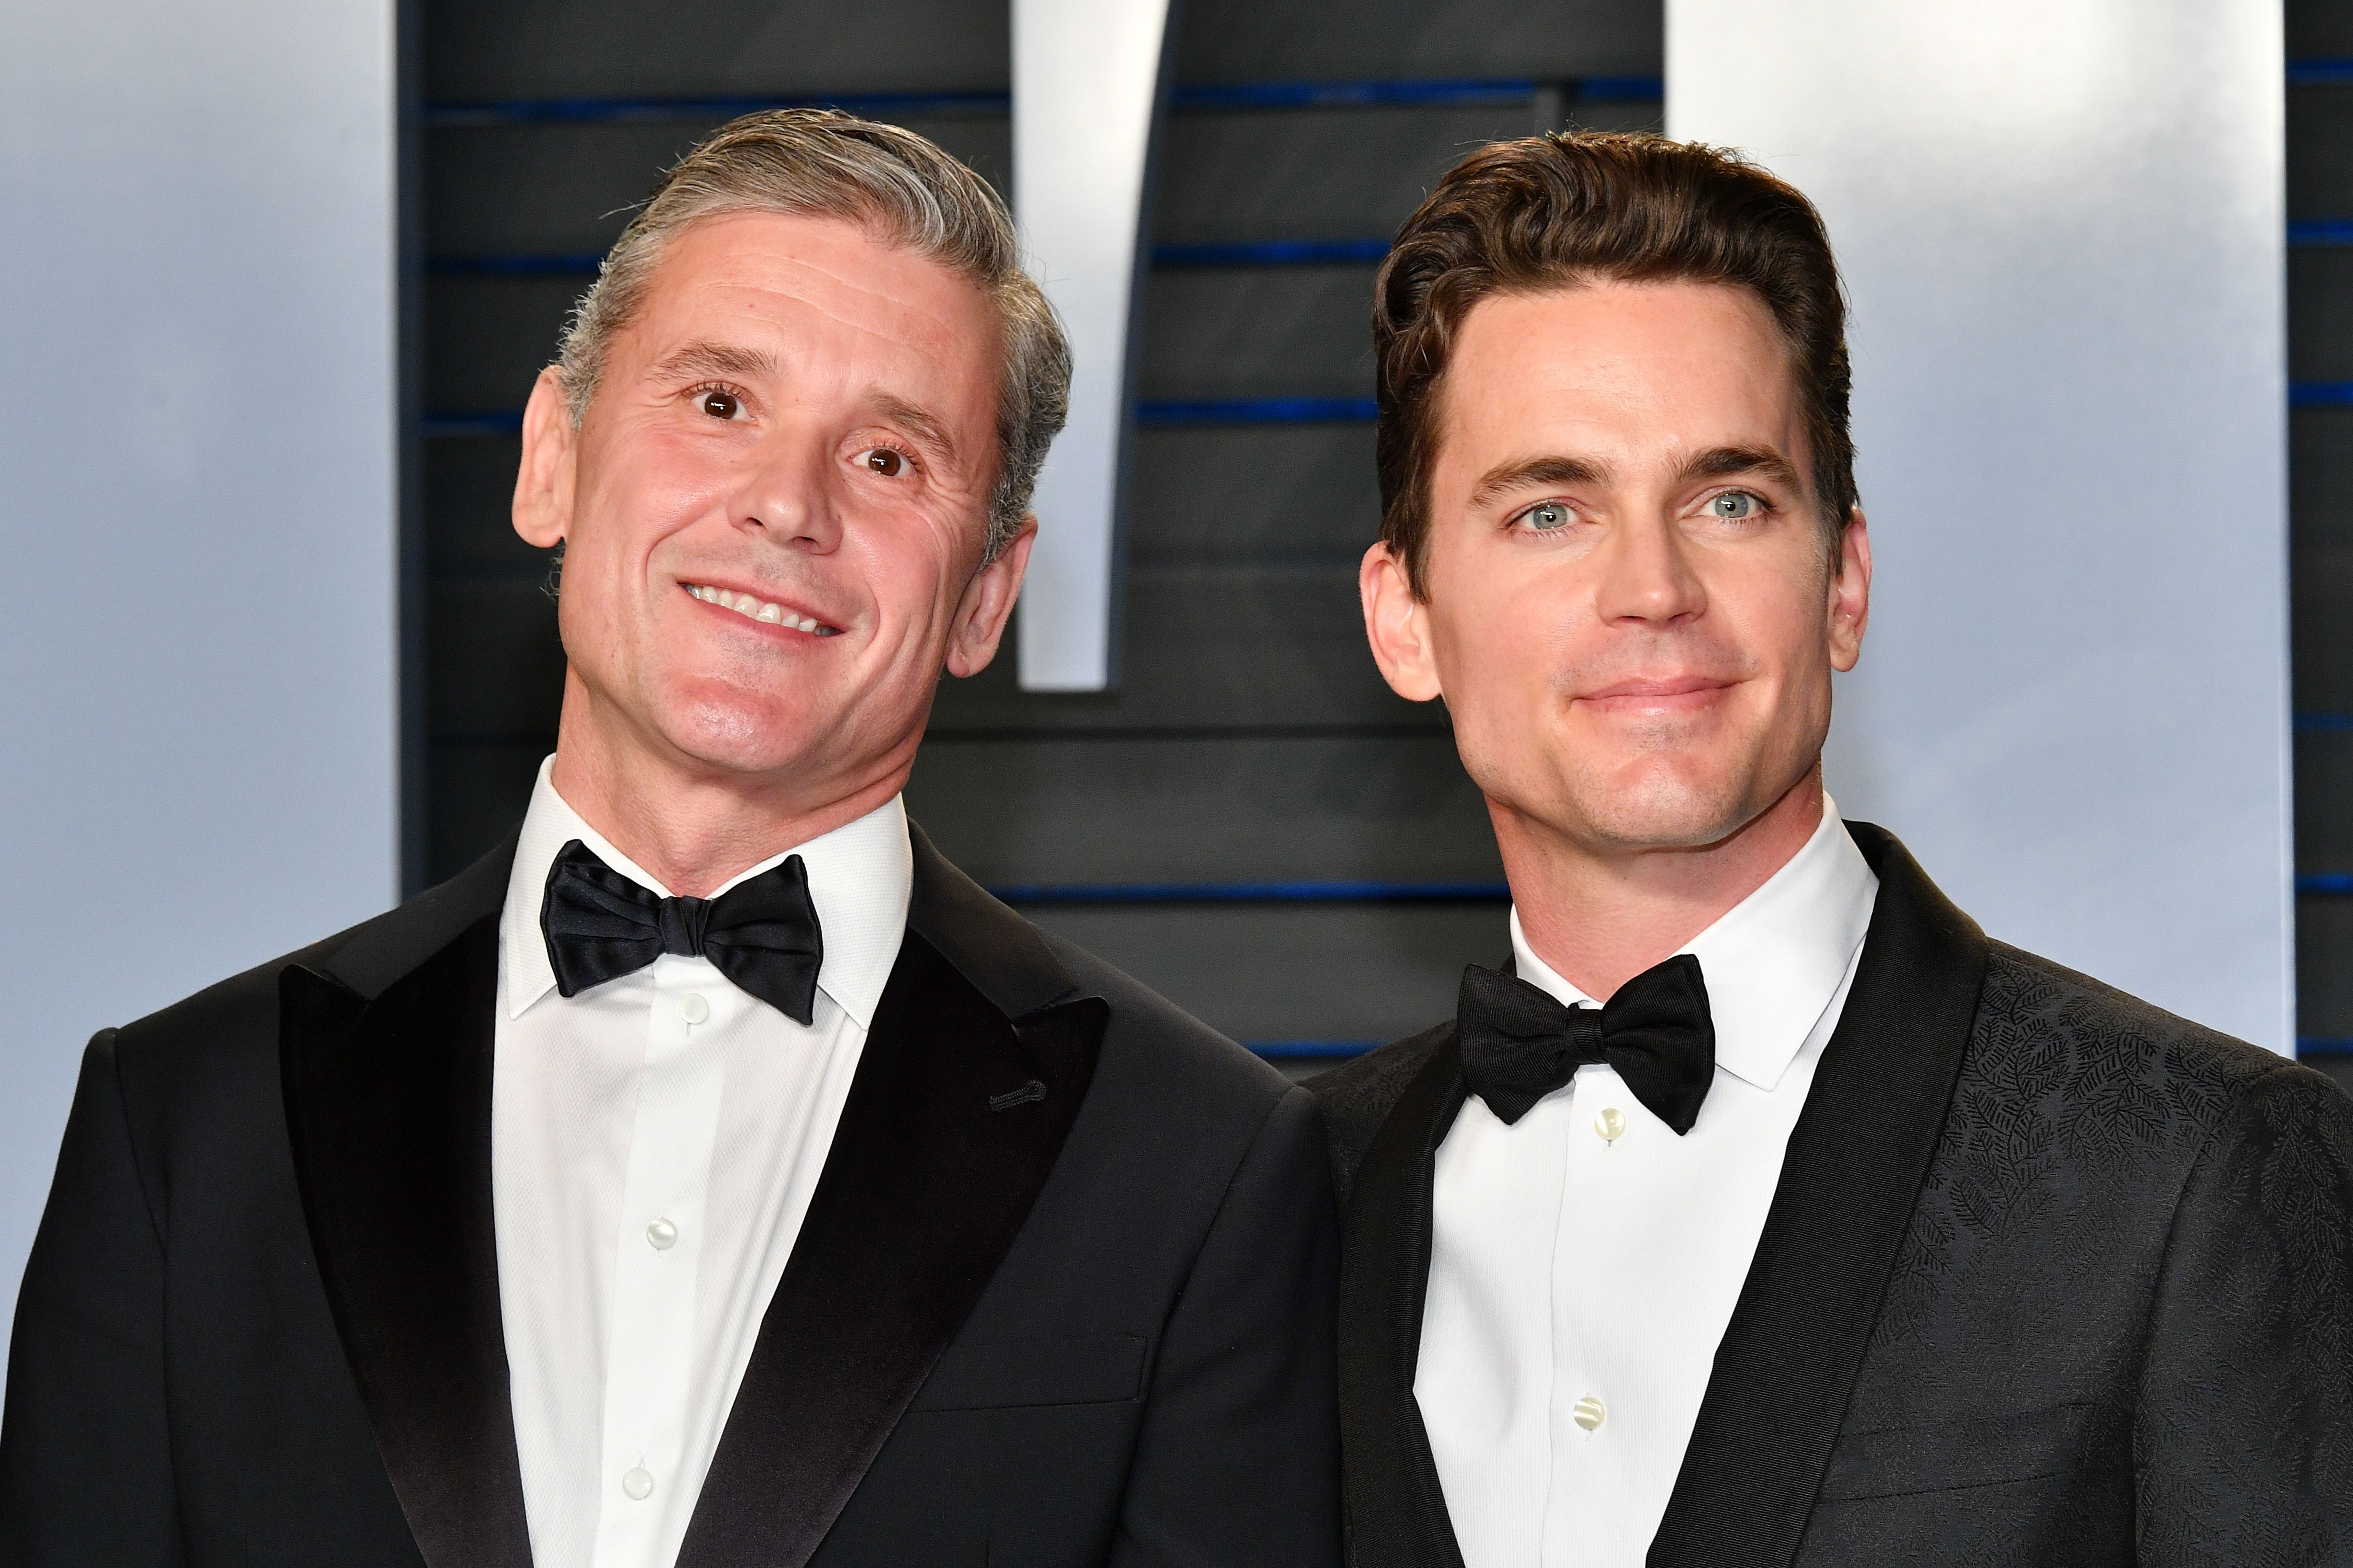 Simon Halls and Matt Bomer during the 2018 Vanity Fair Oscar Party hosted by Radhika Jones at Wallis Annenberg Center for the Performing Arts on March 4, 2018, in Beverly Hills, California. | Source: Getty Images